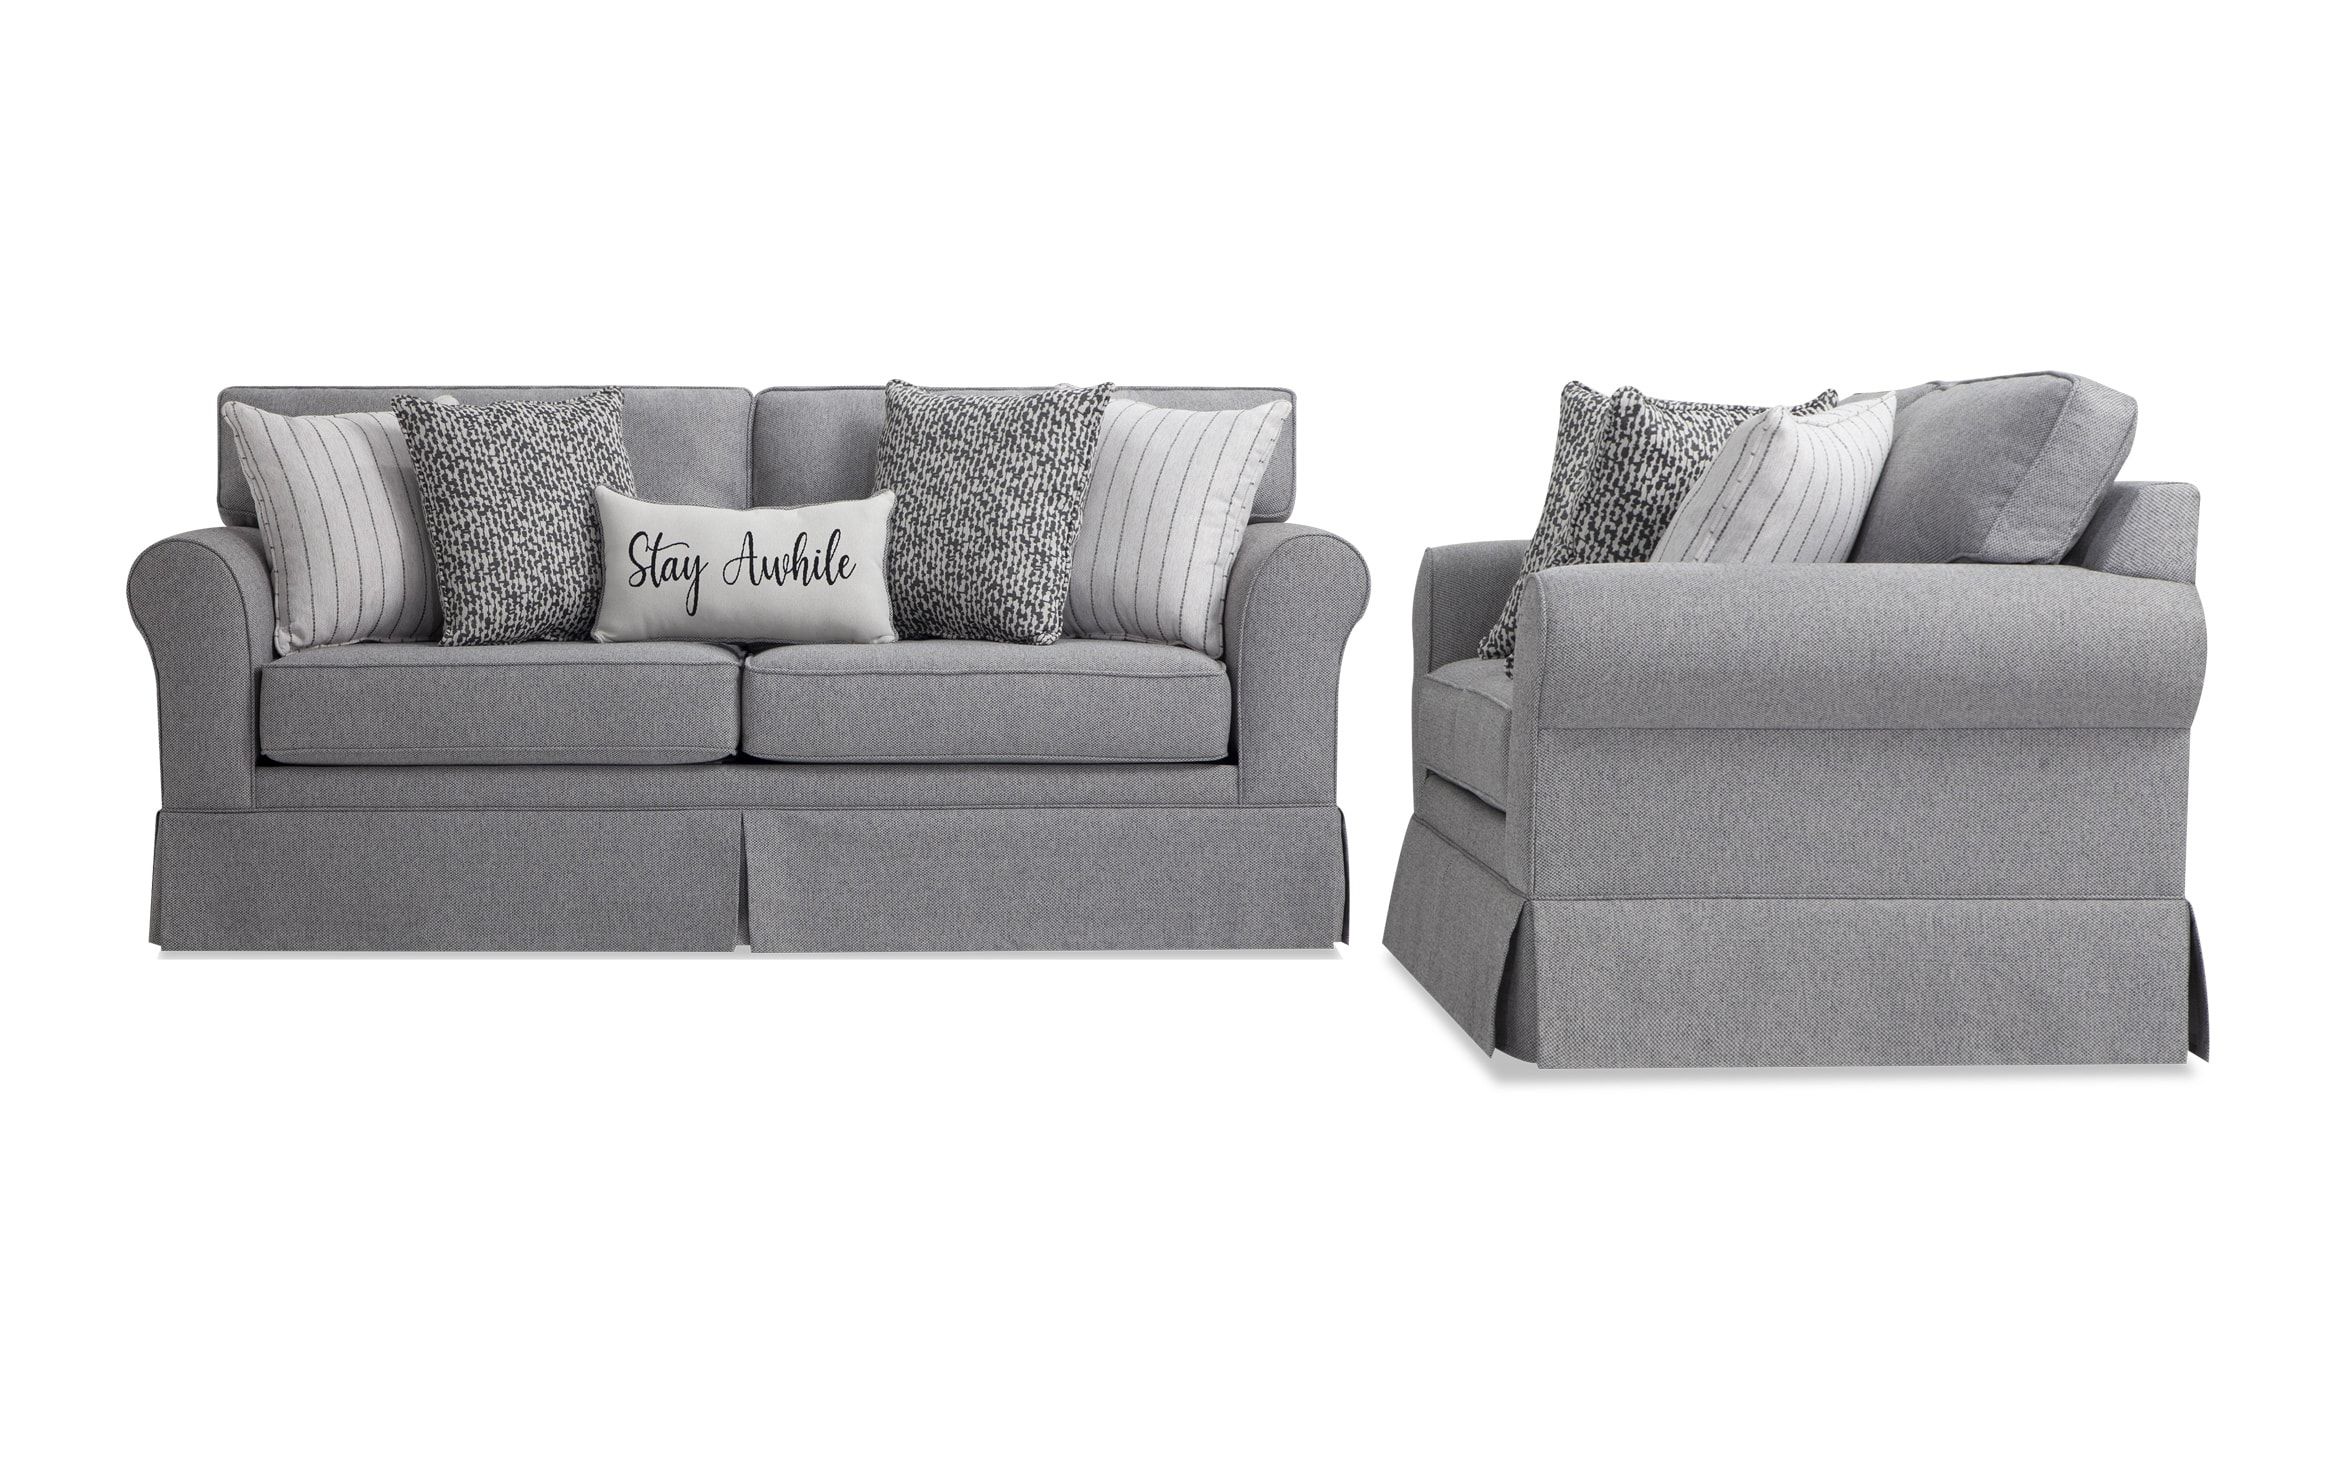 Bobs Furniture Sofa And Loveseat Sets | Baci Living Room Inside Scarlett Beige Sofas (View 3 of 15)